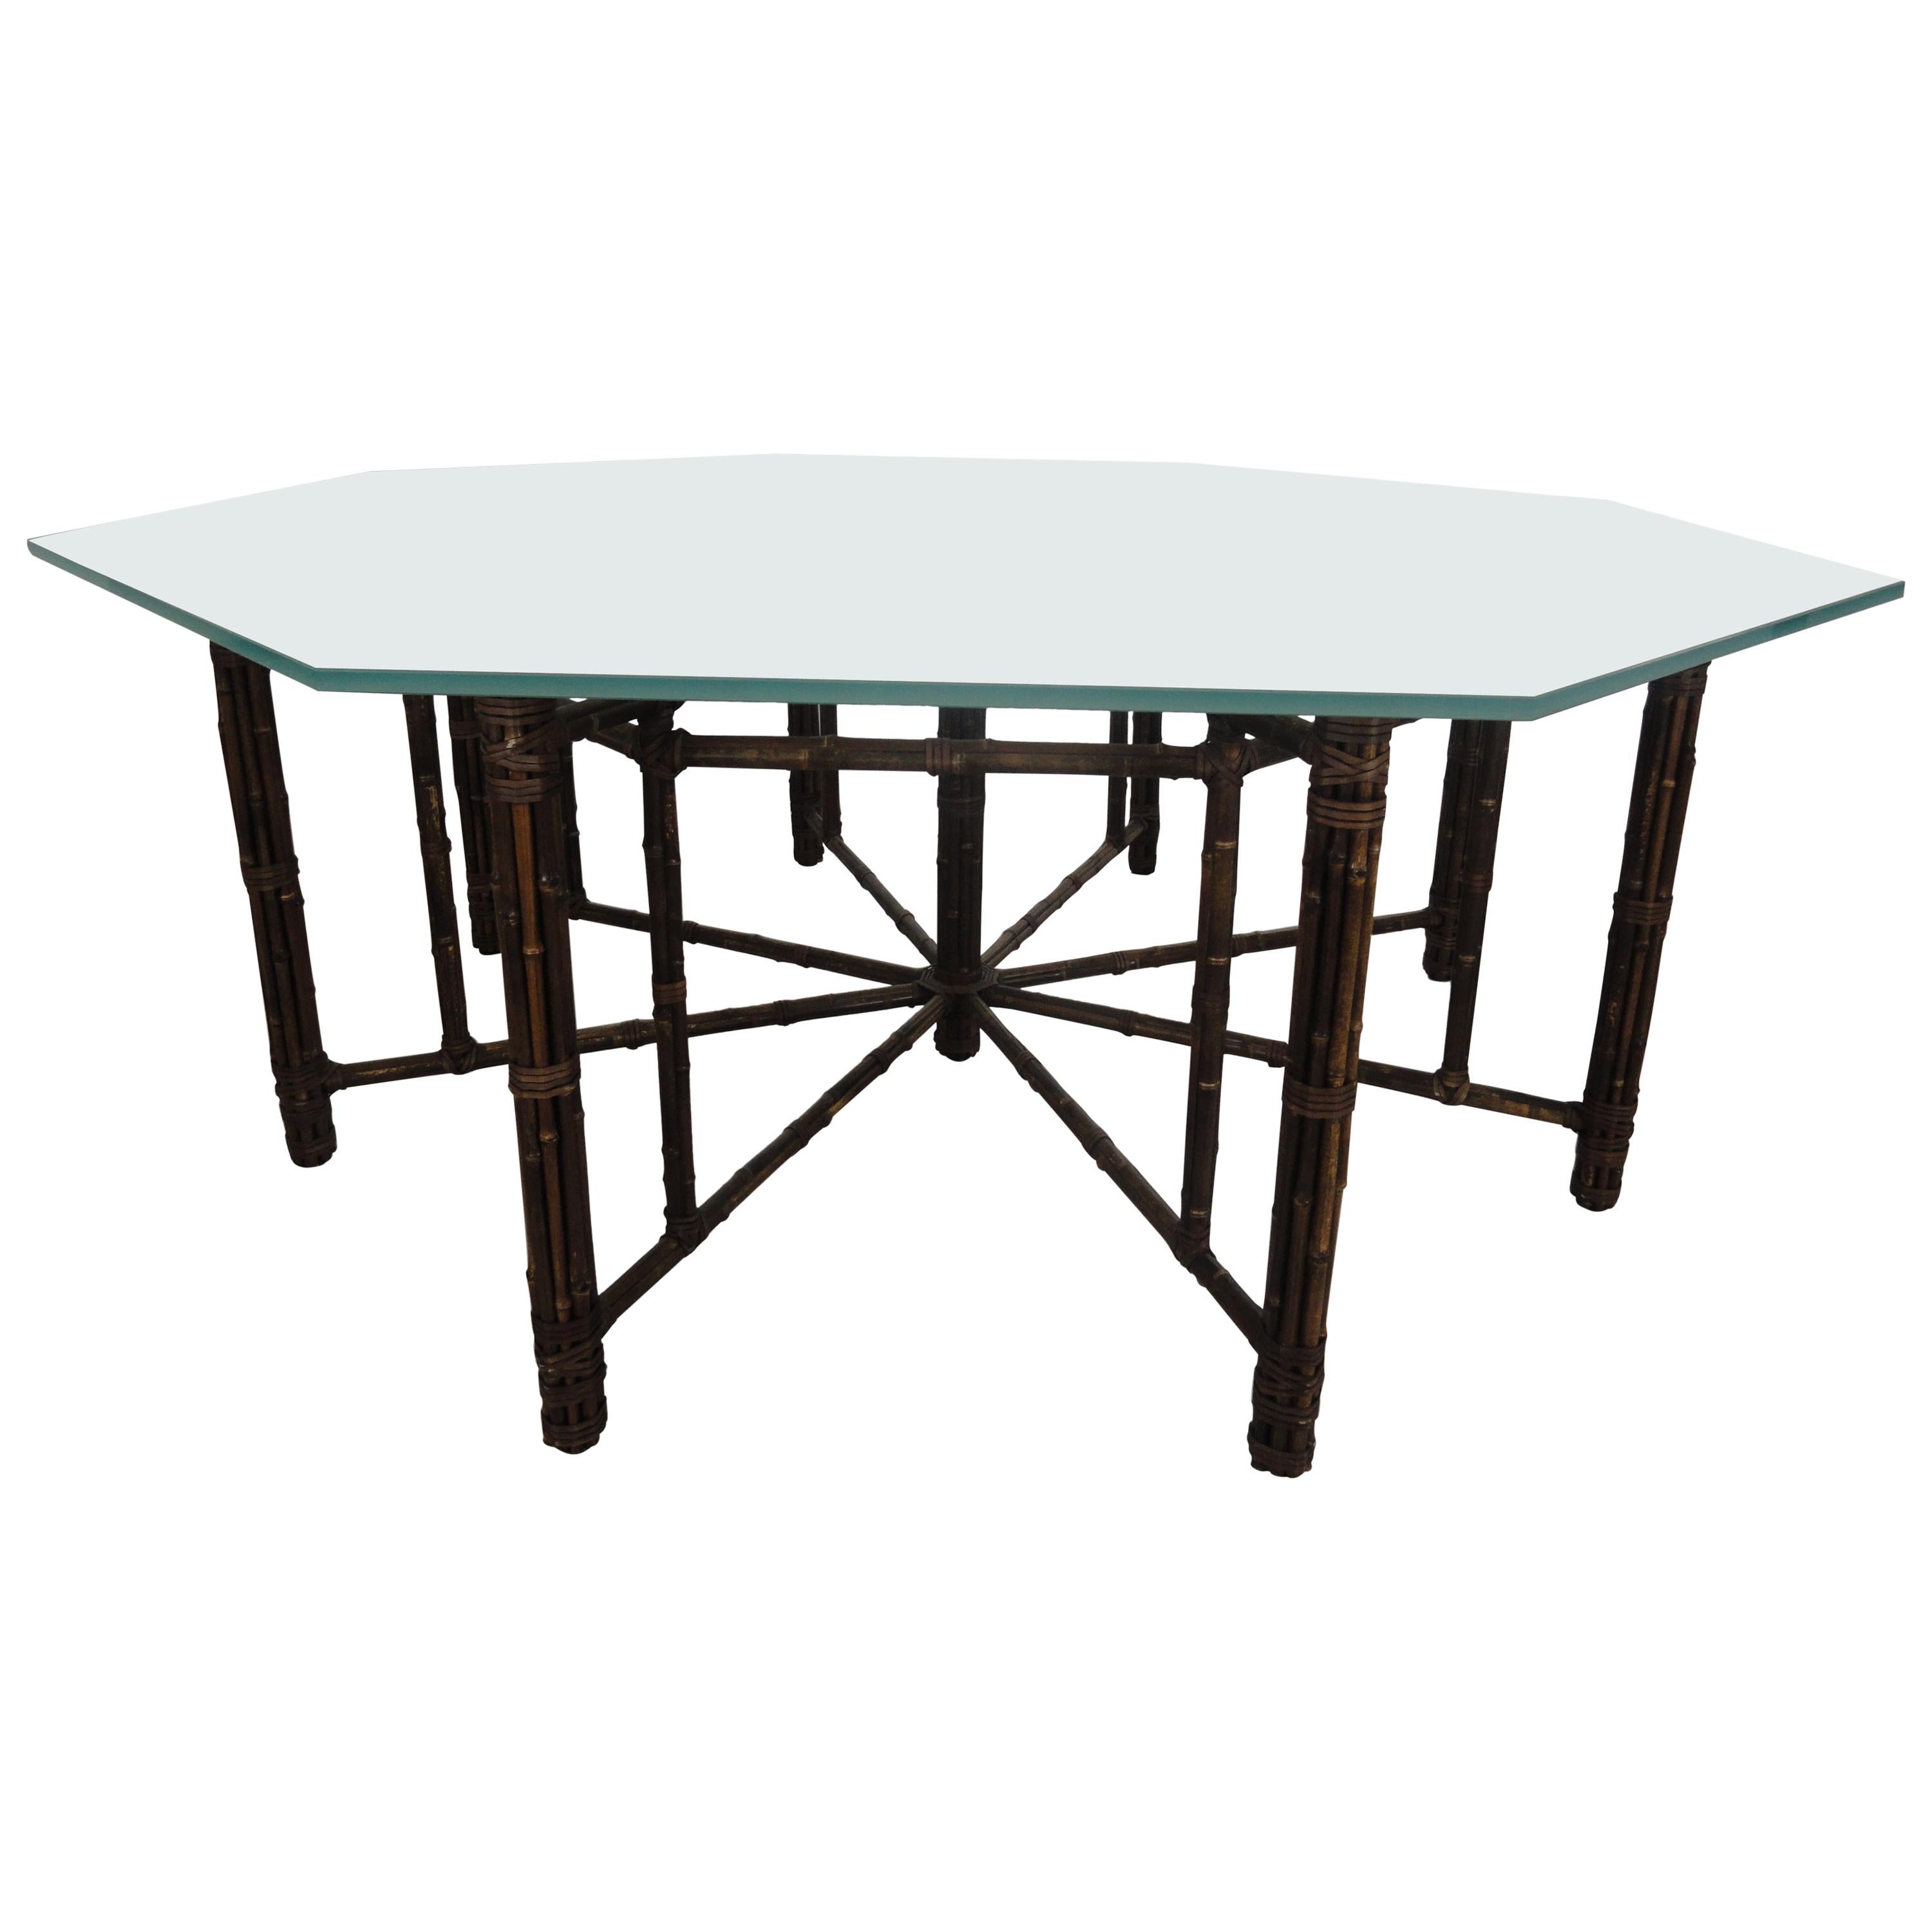 McGuire Octagonal Bamboo and Rattan Dining Table For Sale